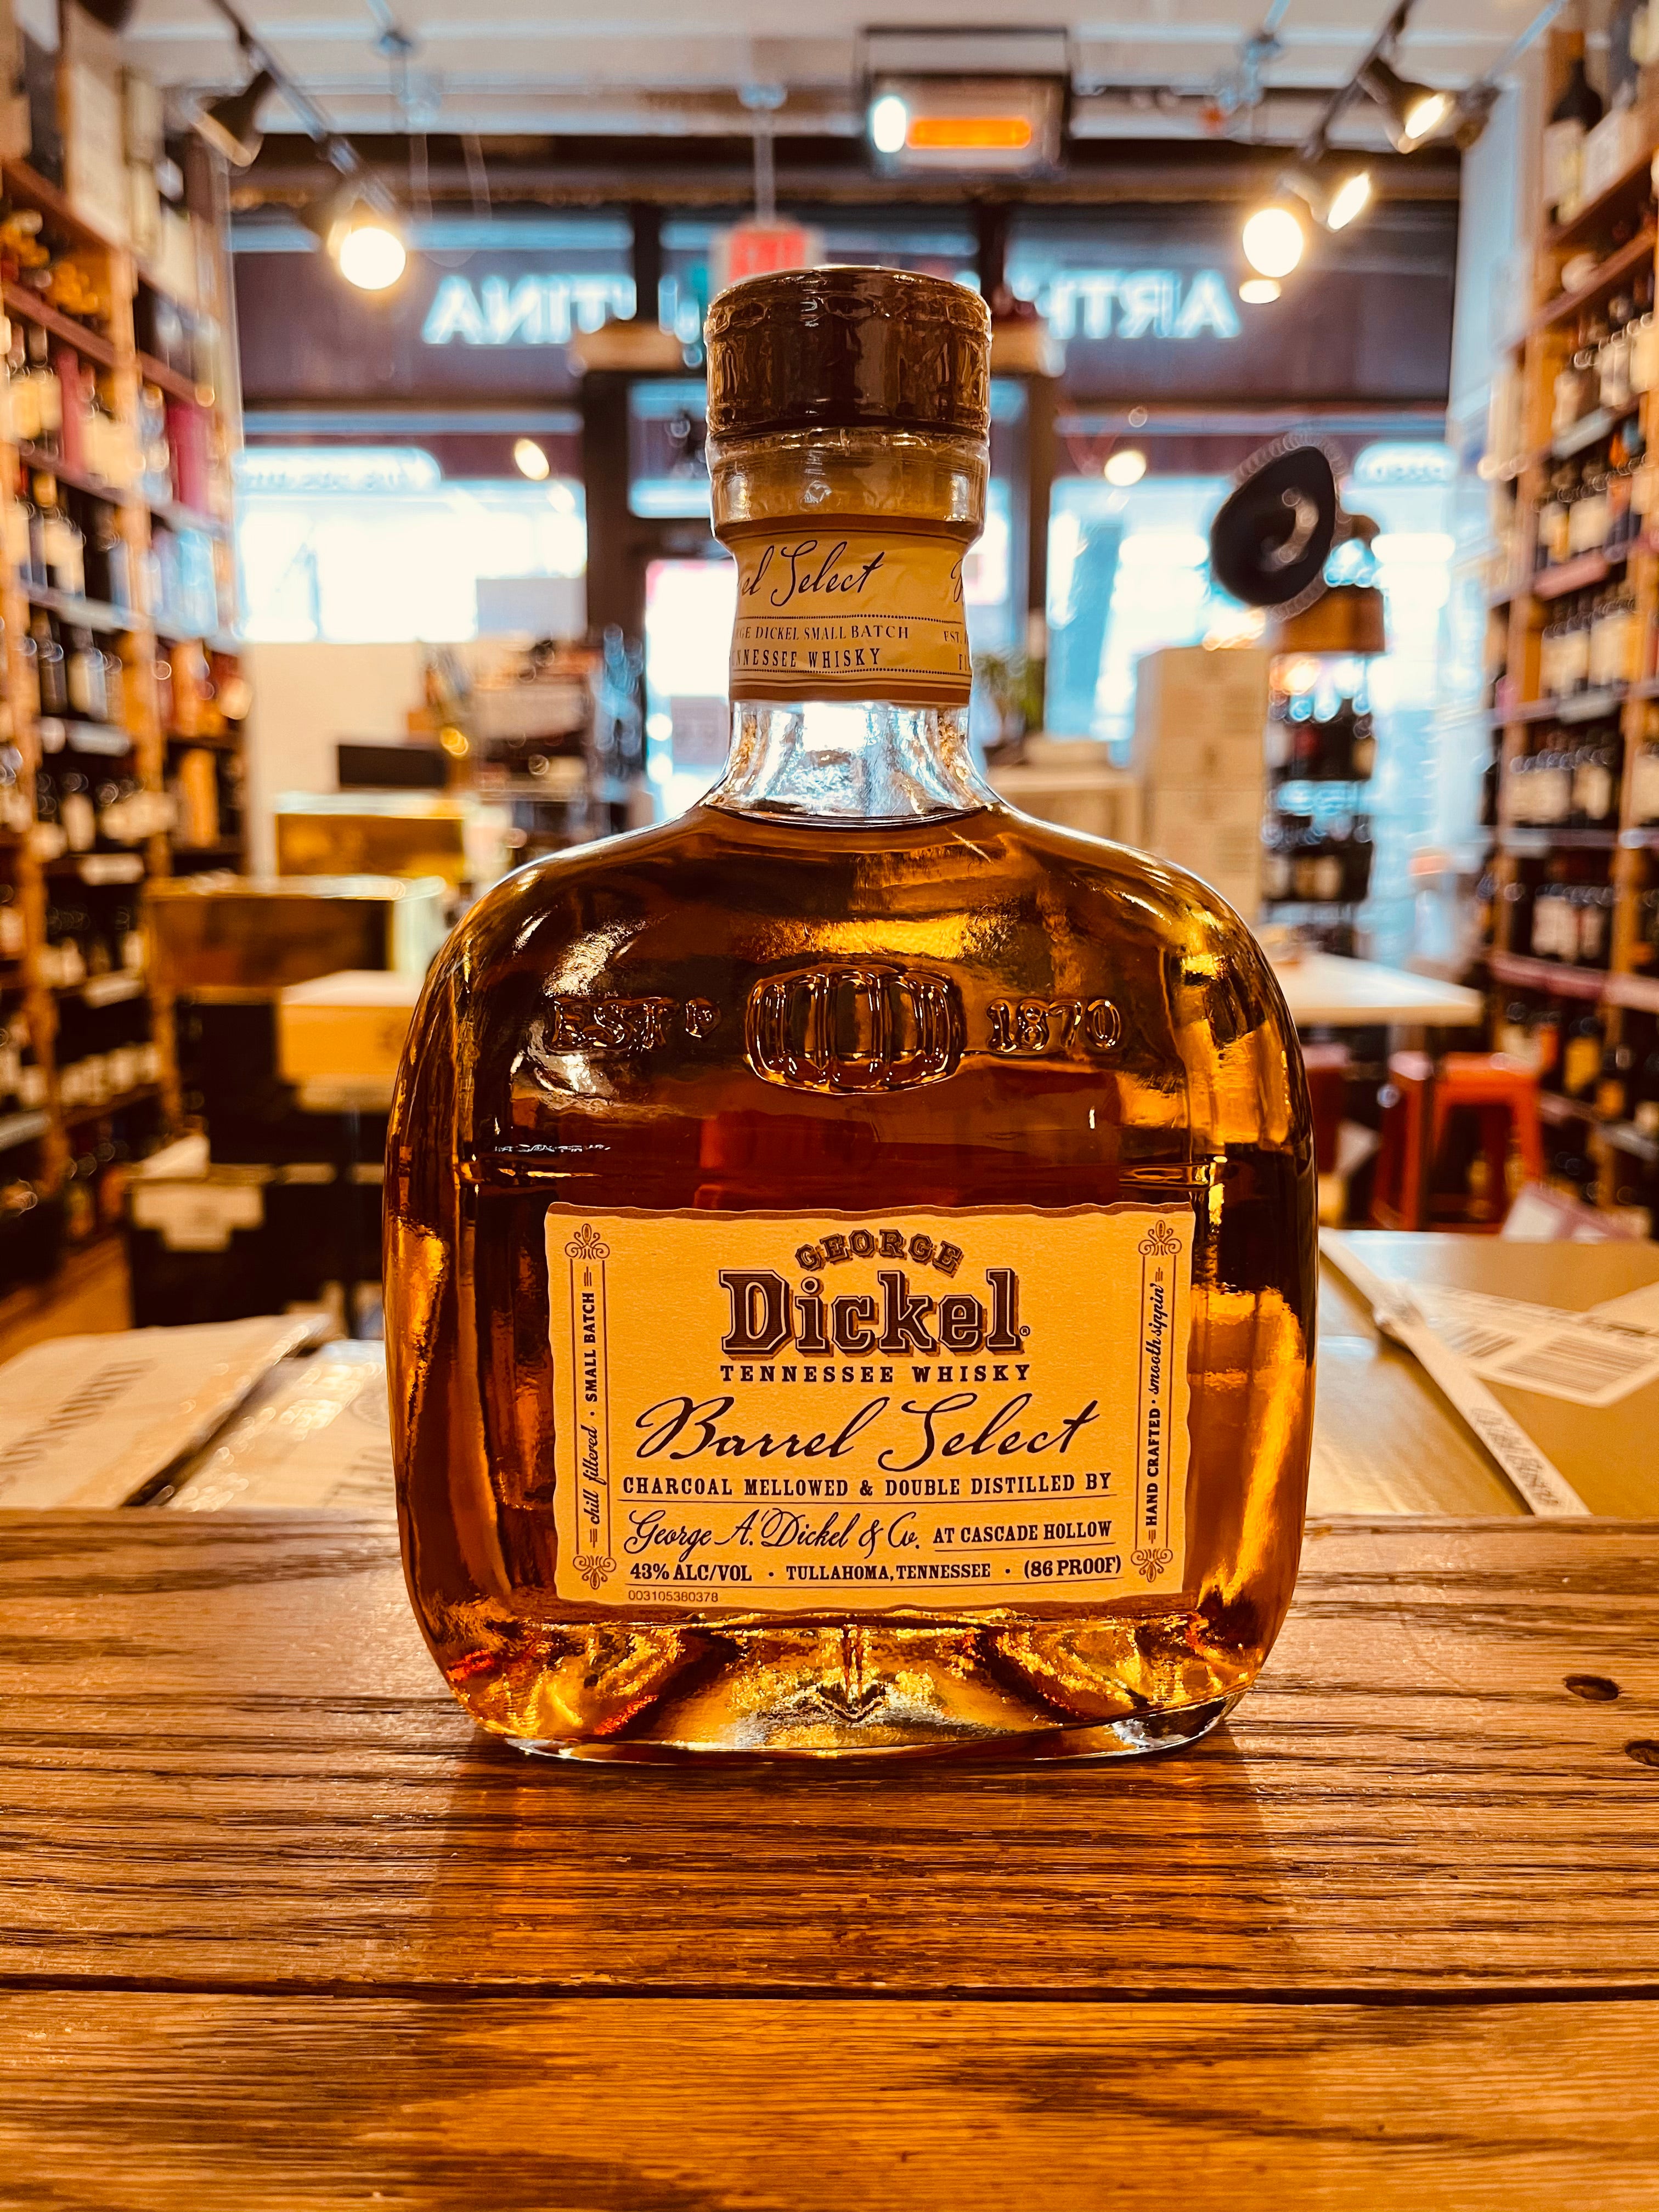 George Dickel Barrel Select 750mL short flat squat square rounded bottle with a beige label and wooden top